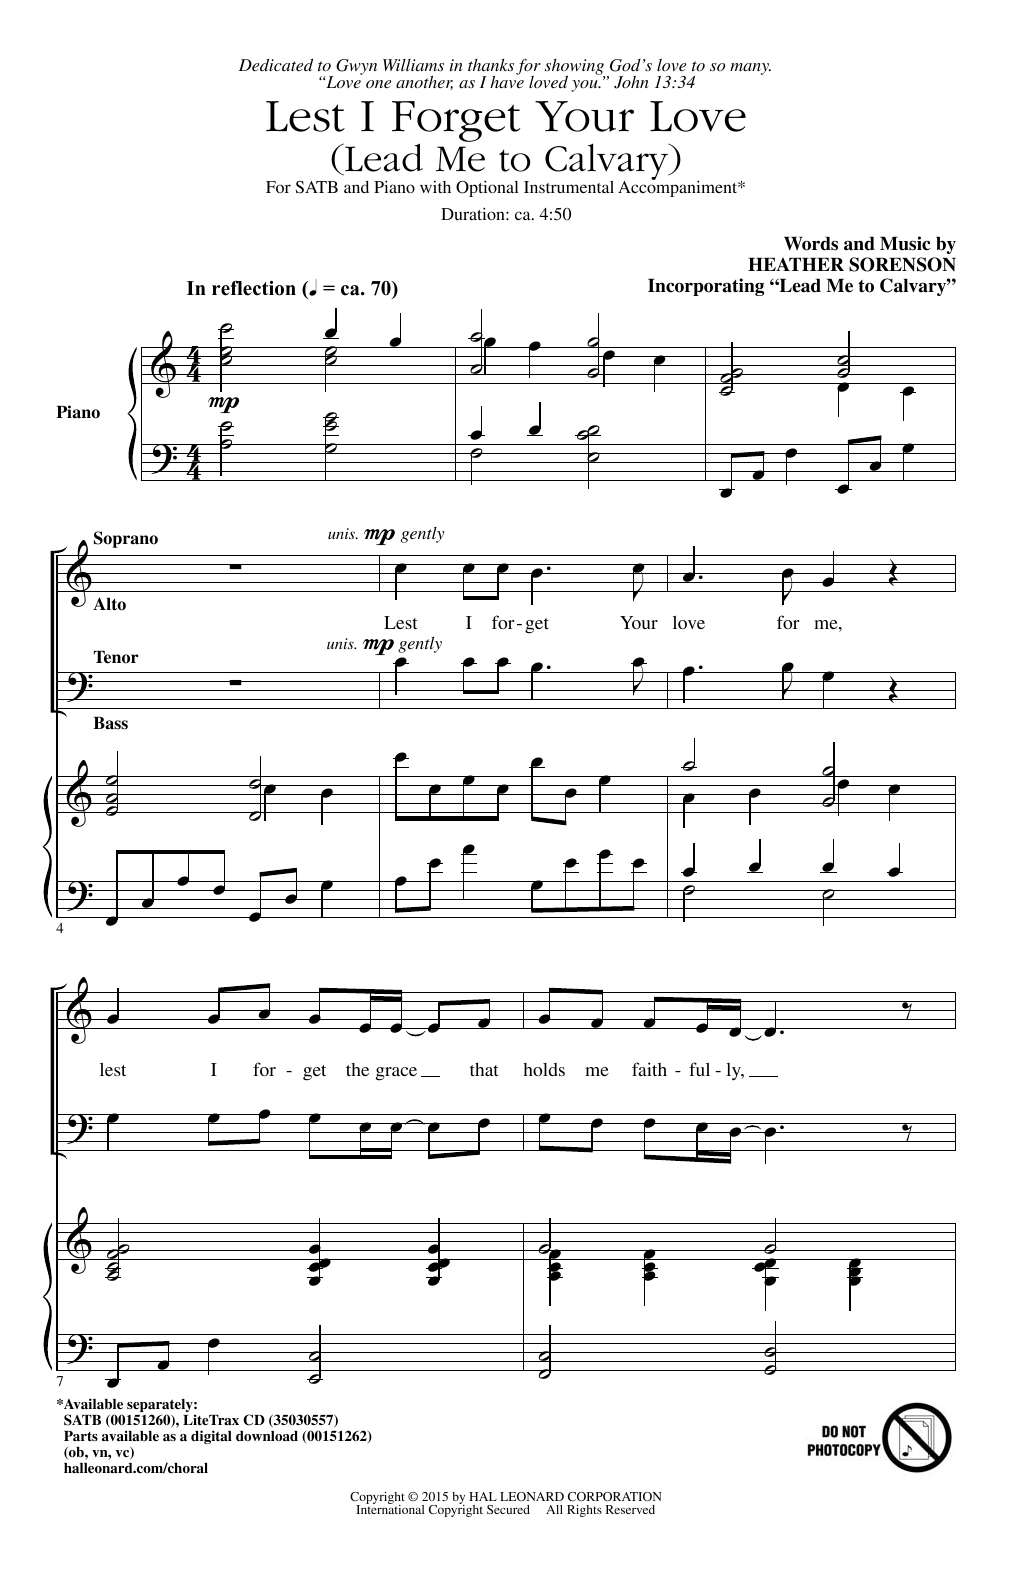 Download Heather Sorenson Lest I Forget Your Love (Lead Me To Cal Sheet Music